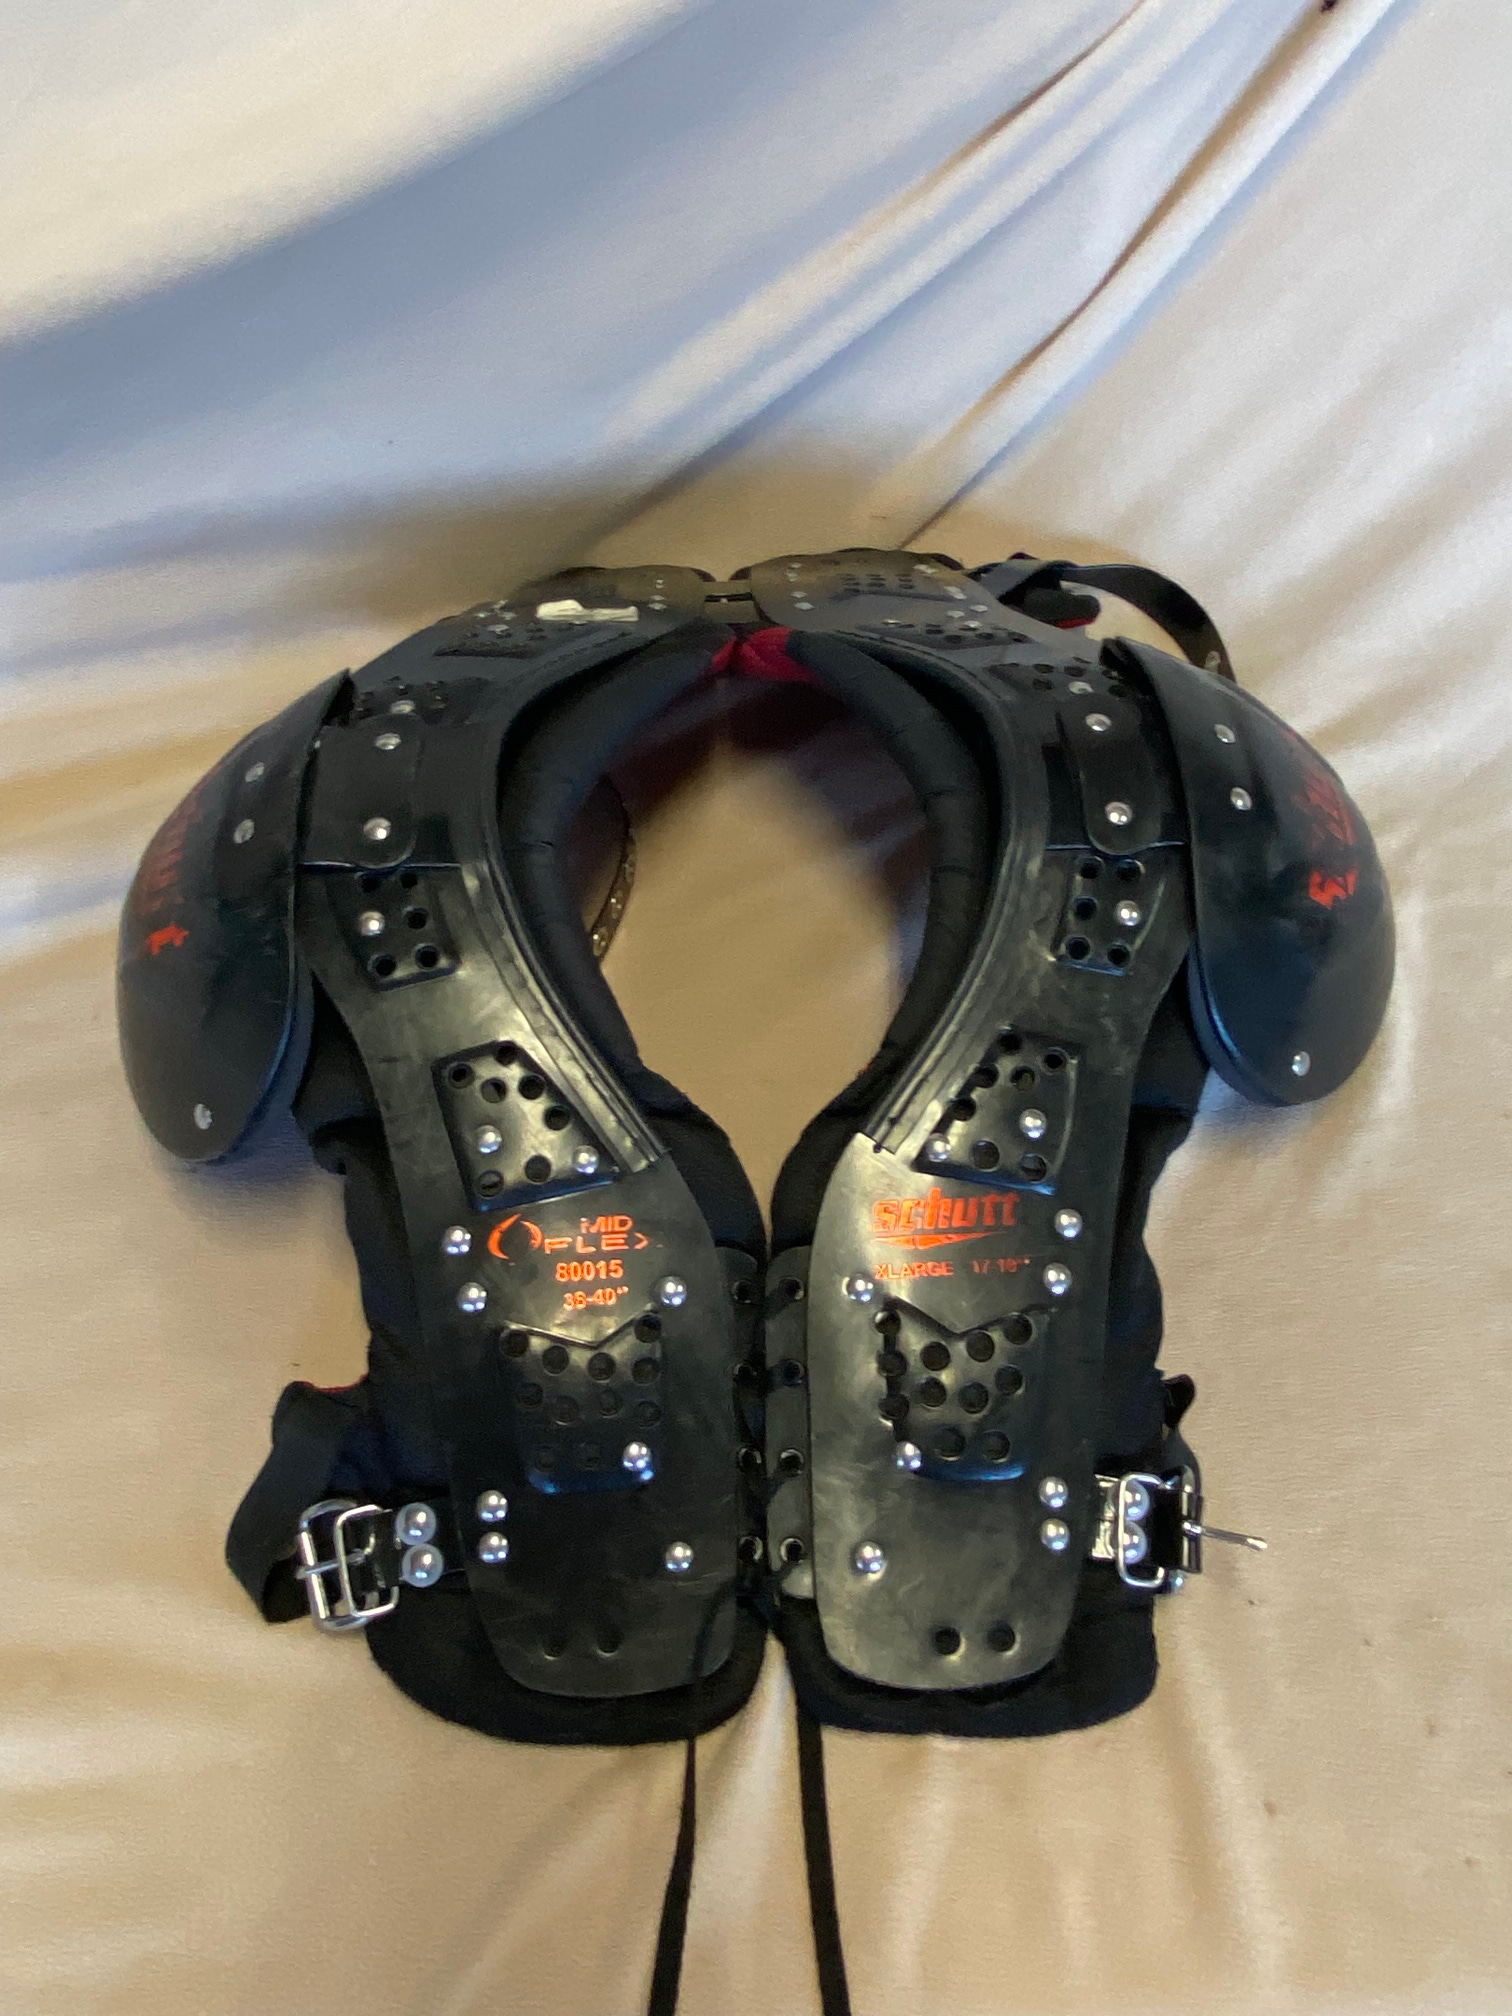 Used Adult Extra Large Schutt Midflex Shoulder Pads